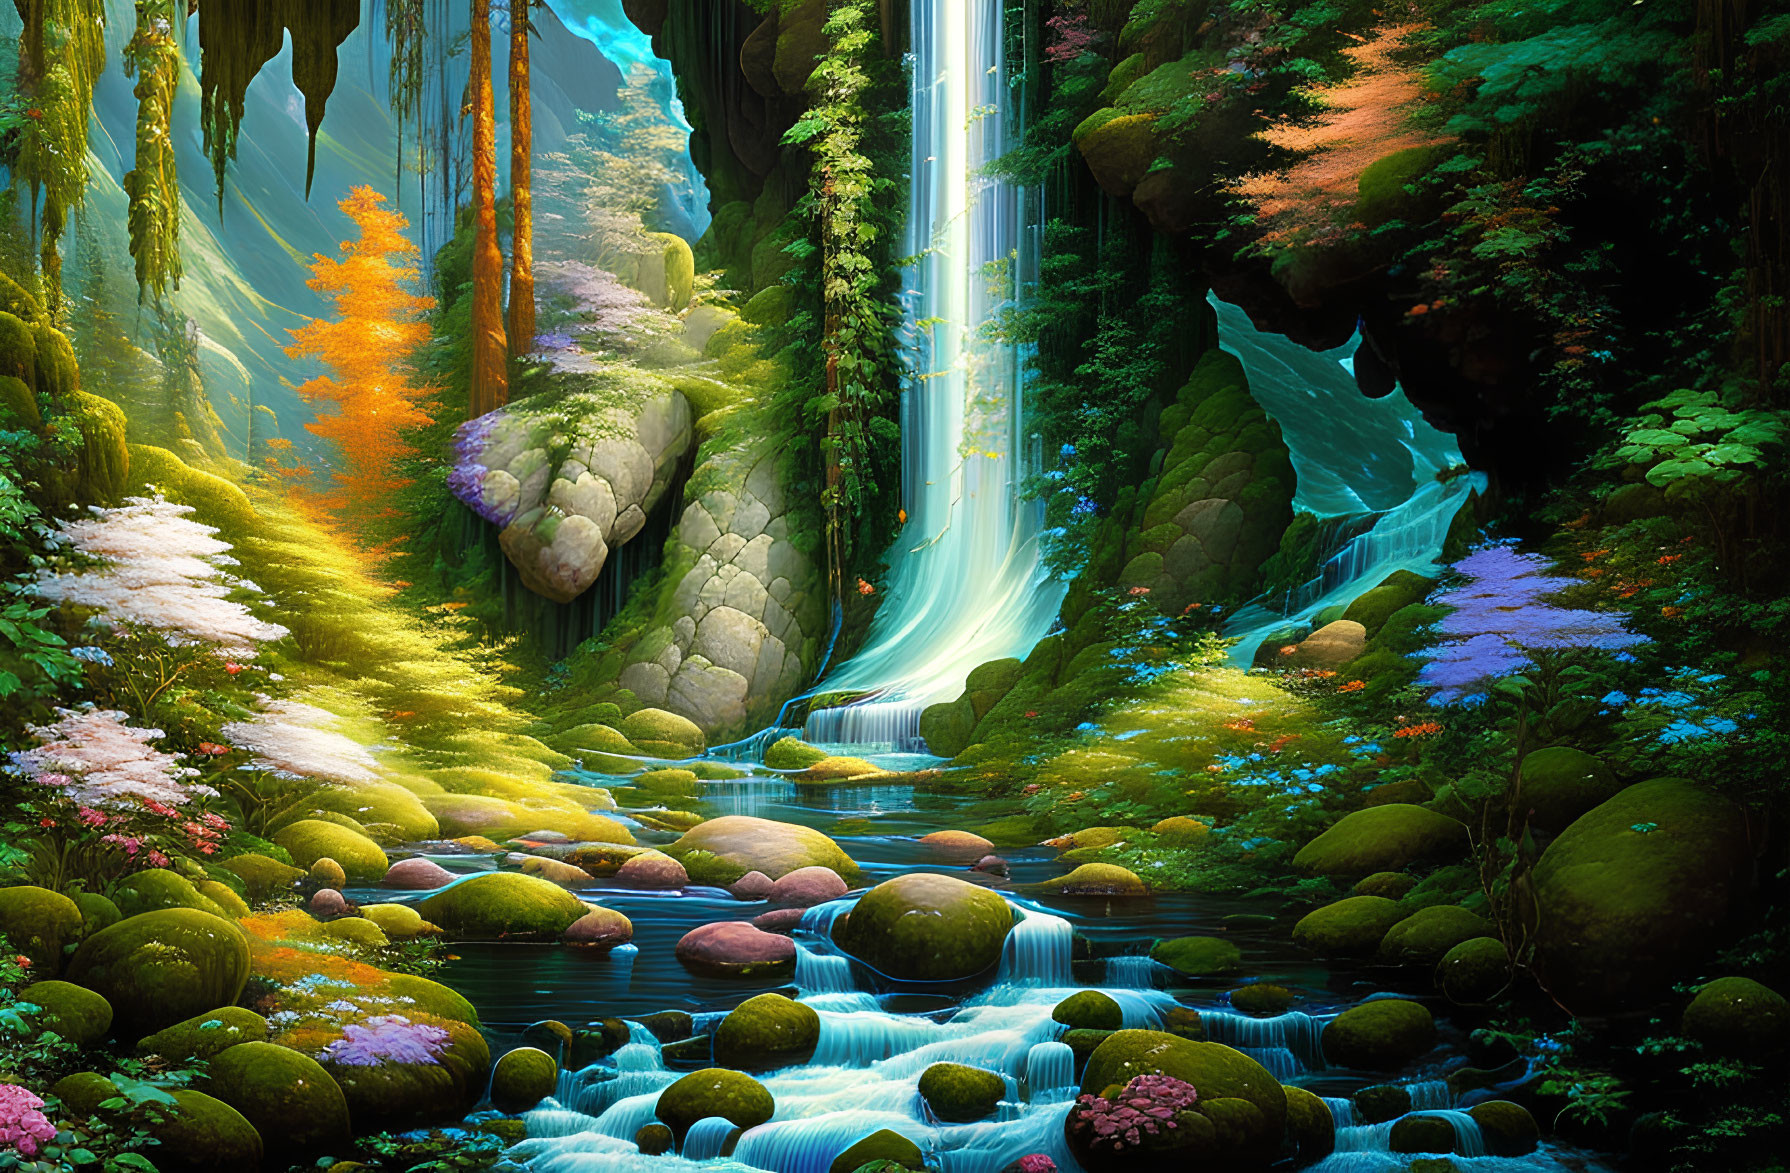 Enchanting woodland scene with waterfall, vibrant flora, moss-covered stones, serene pond